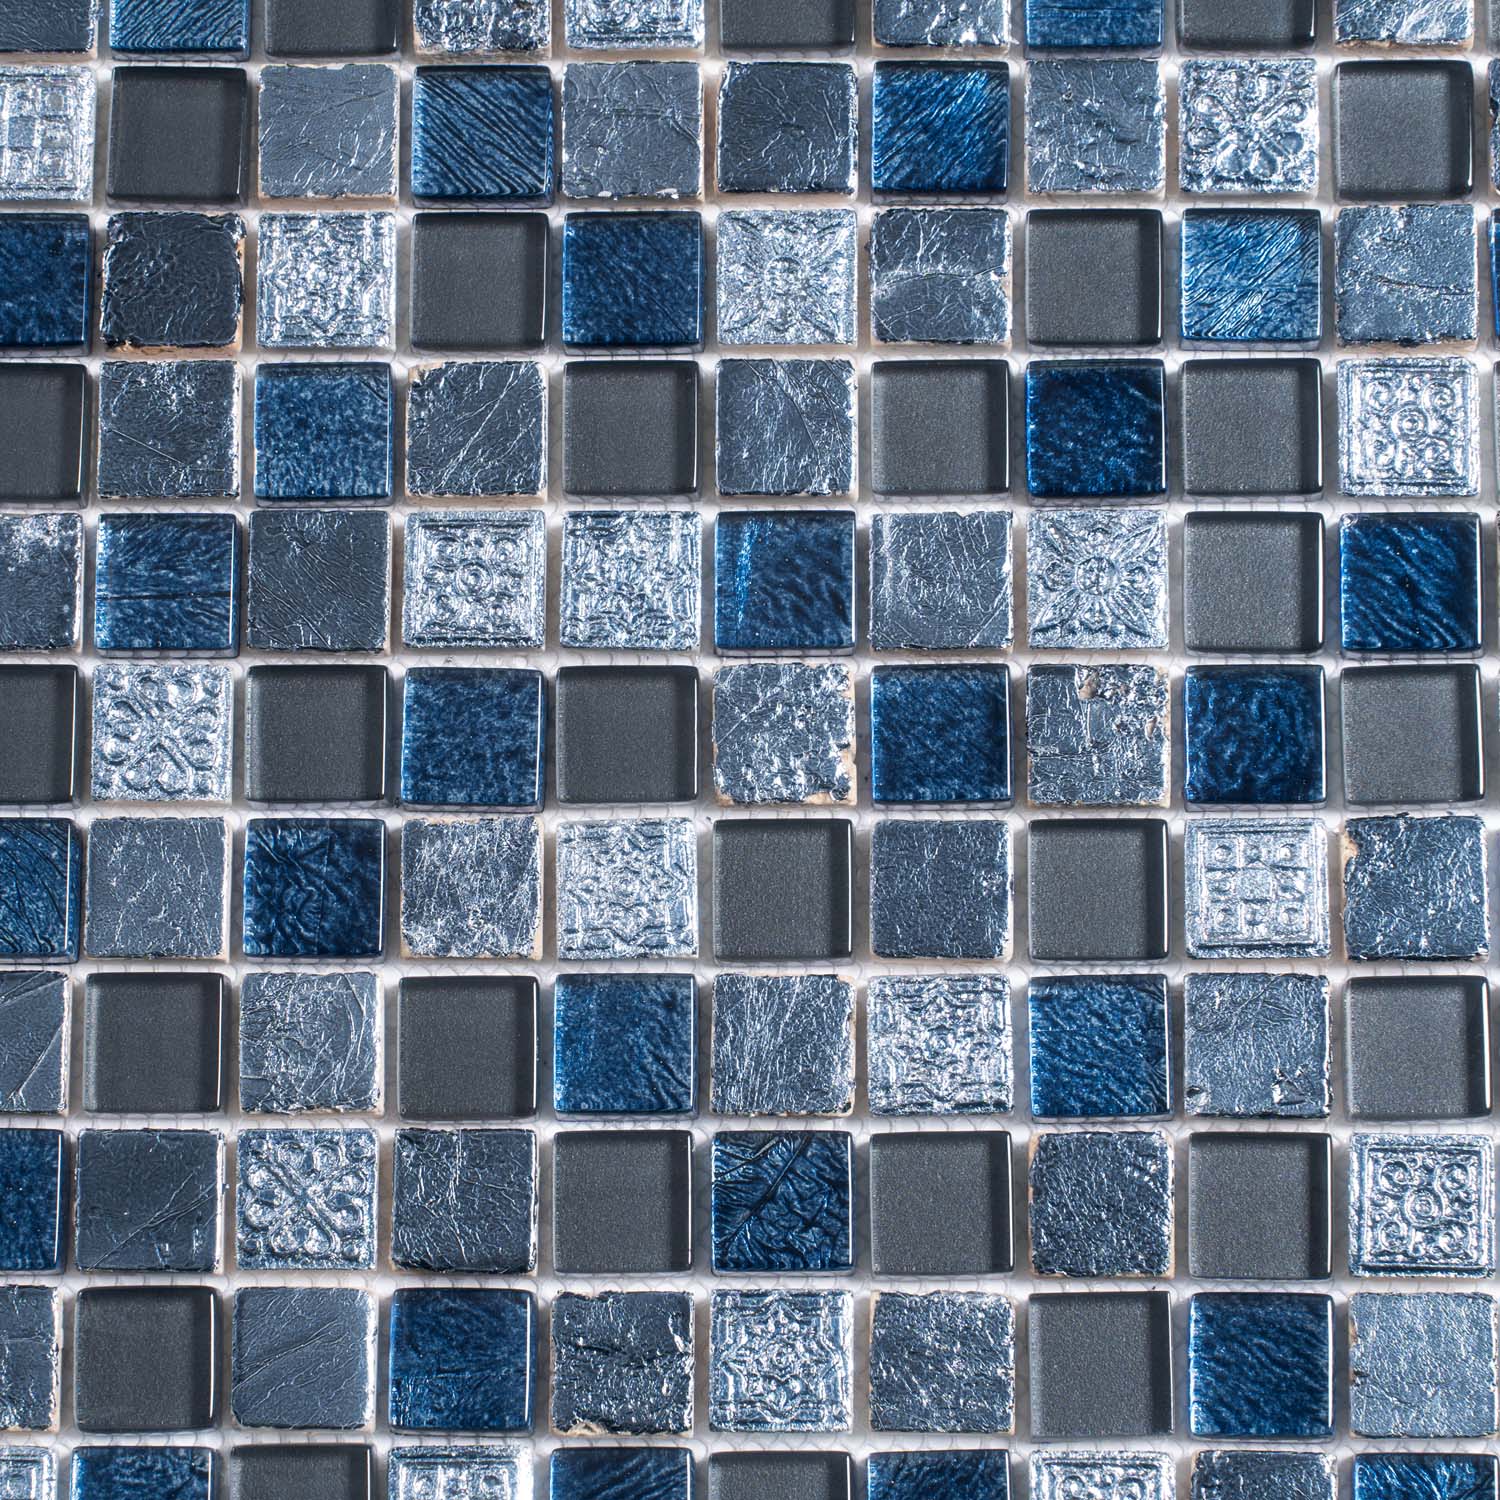 Gray and Blue Square Tile